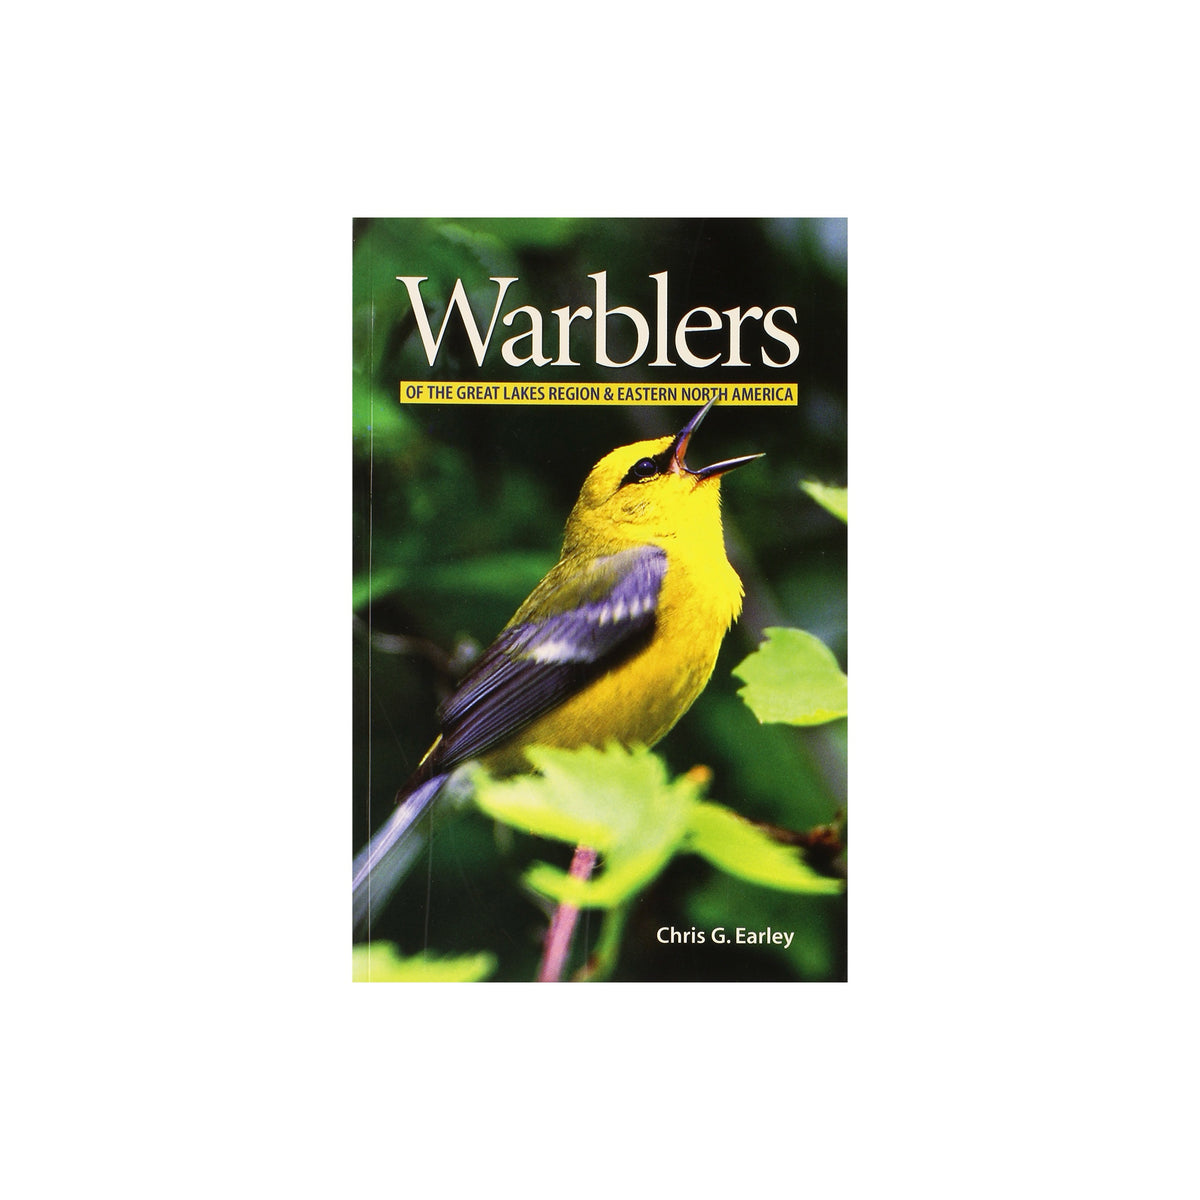 Warblers of The Great Lakes Region